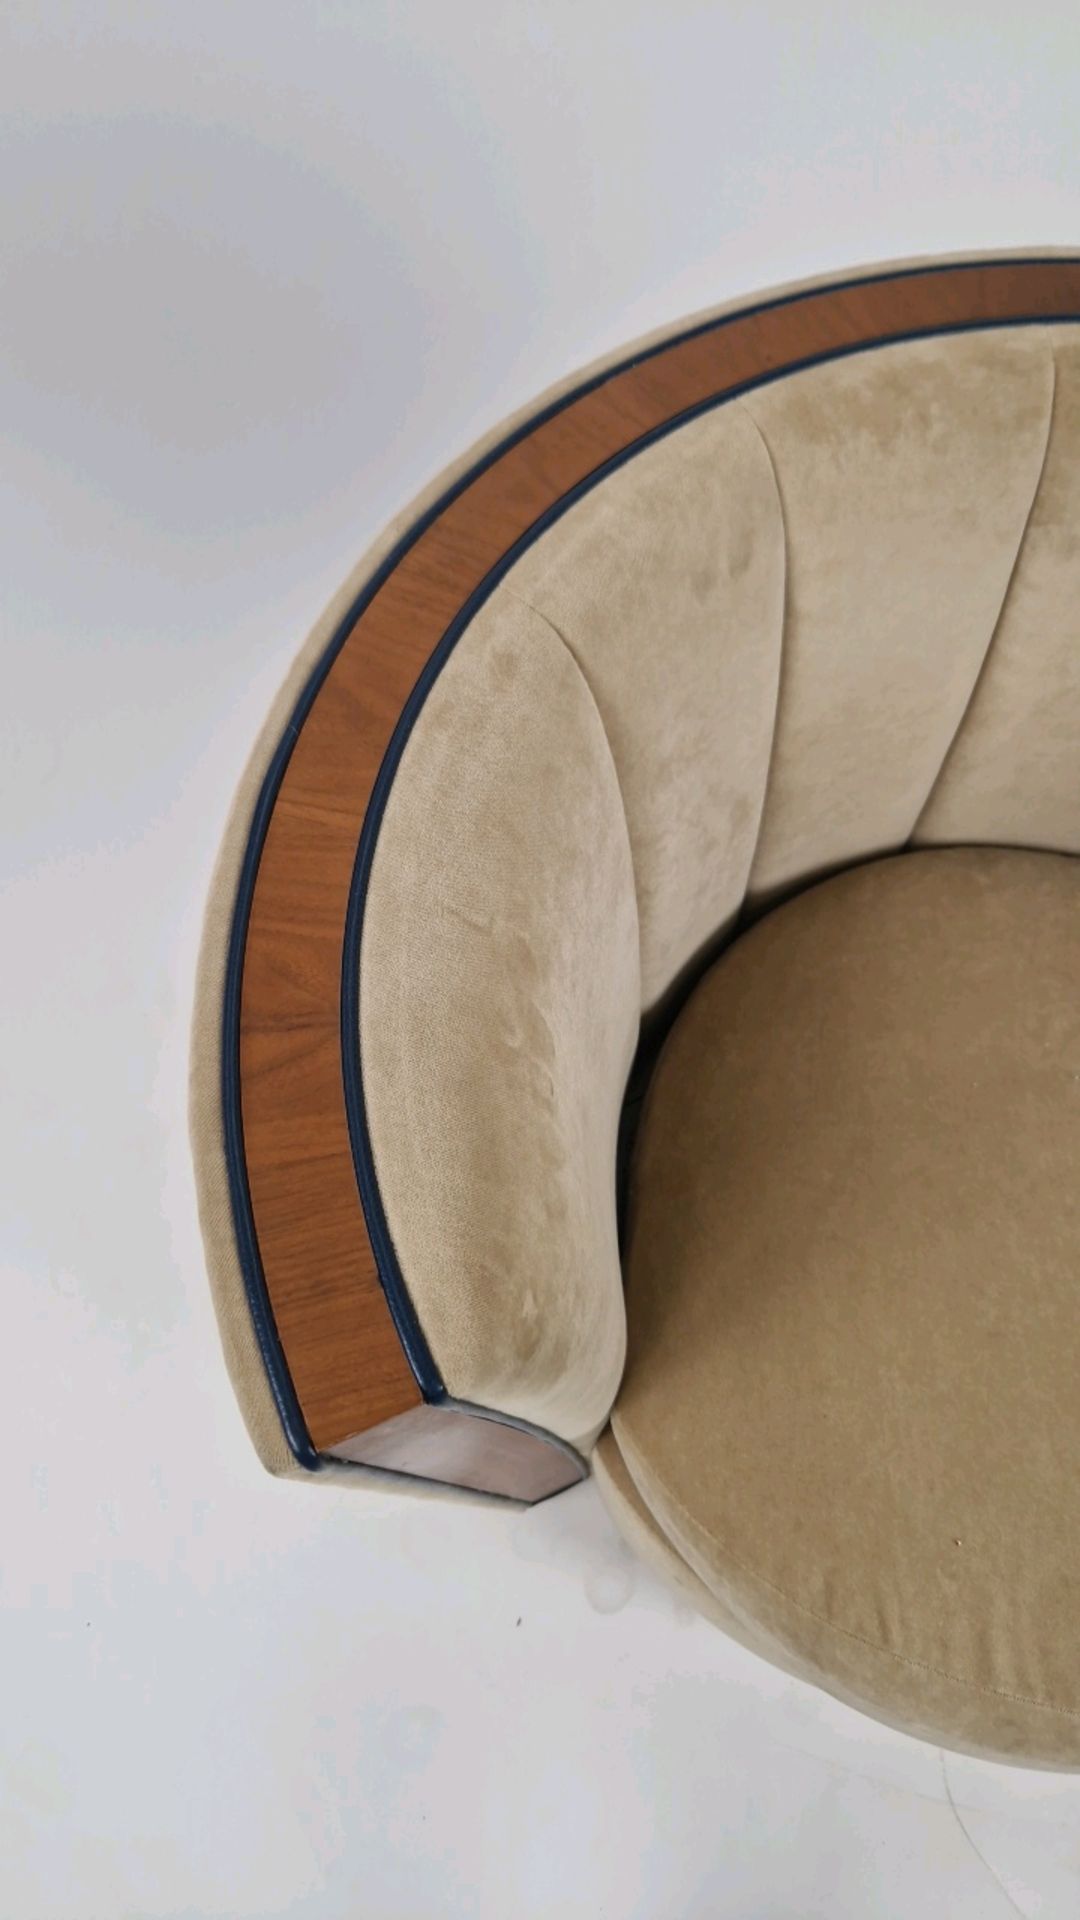 Bespoke David Linley Tub Chair Made for Claridge's Suites - Image 5 of 6